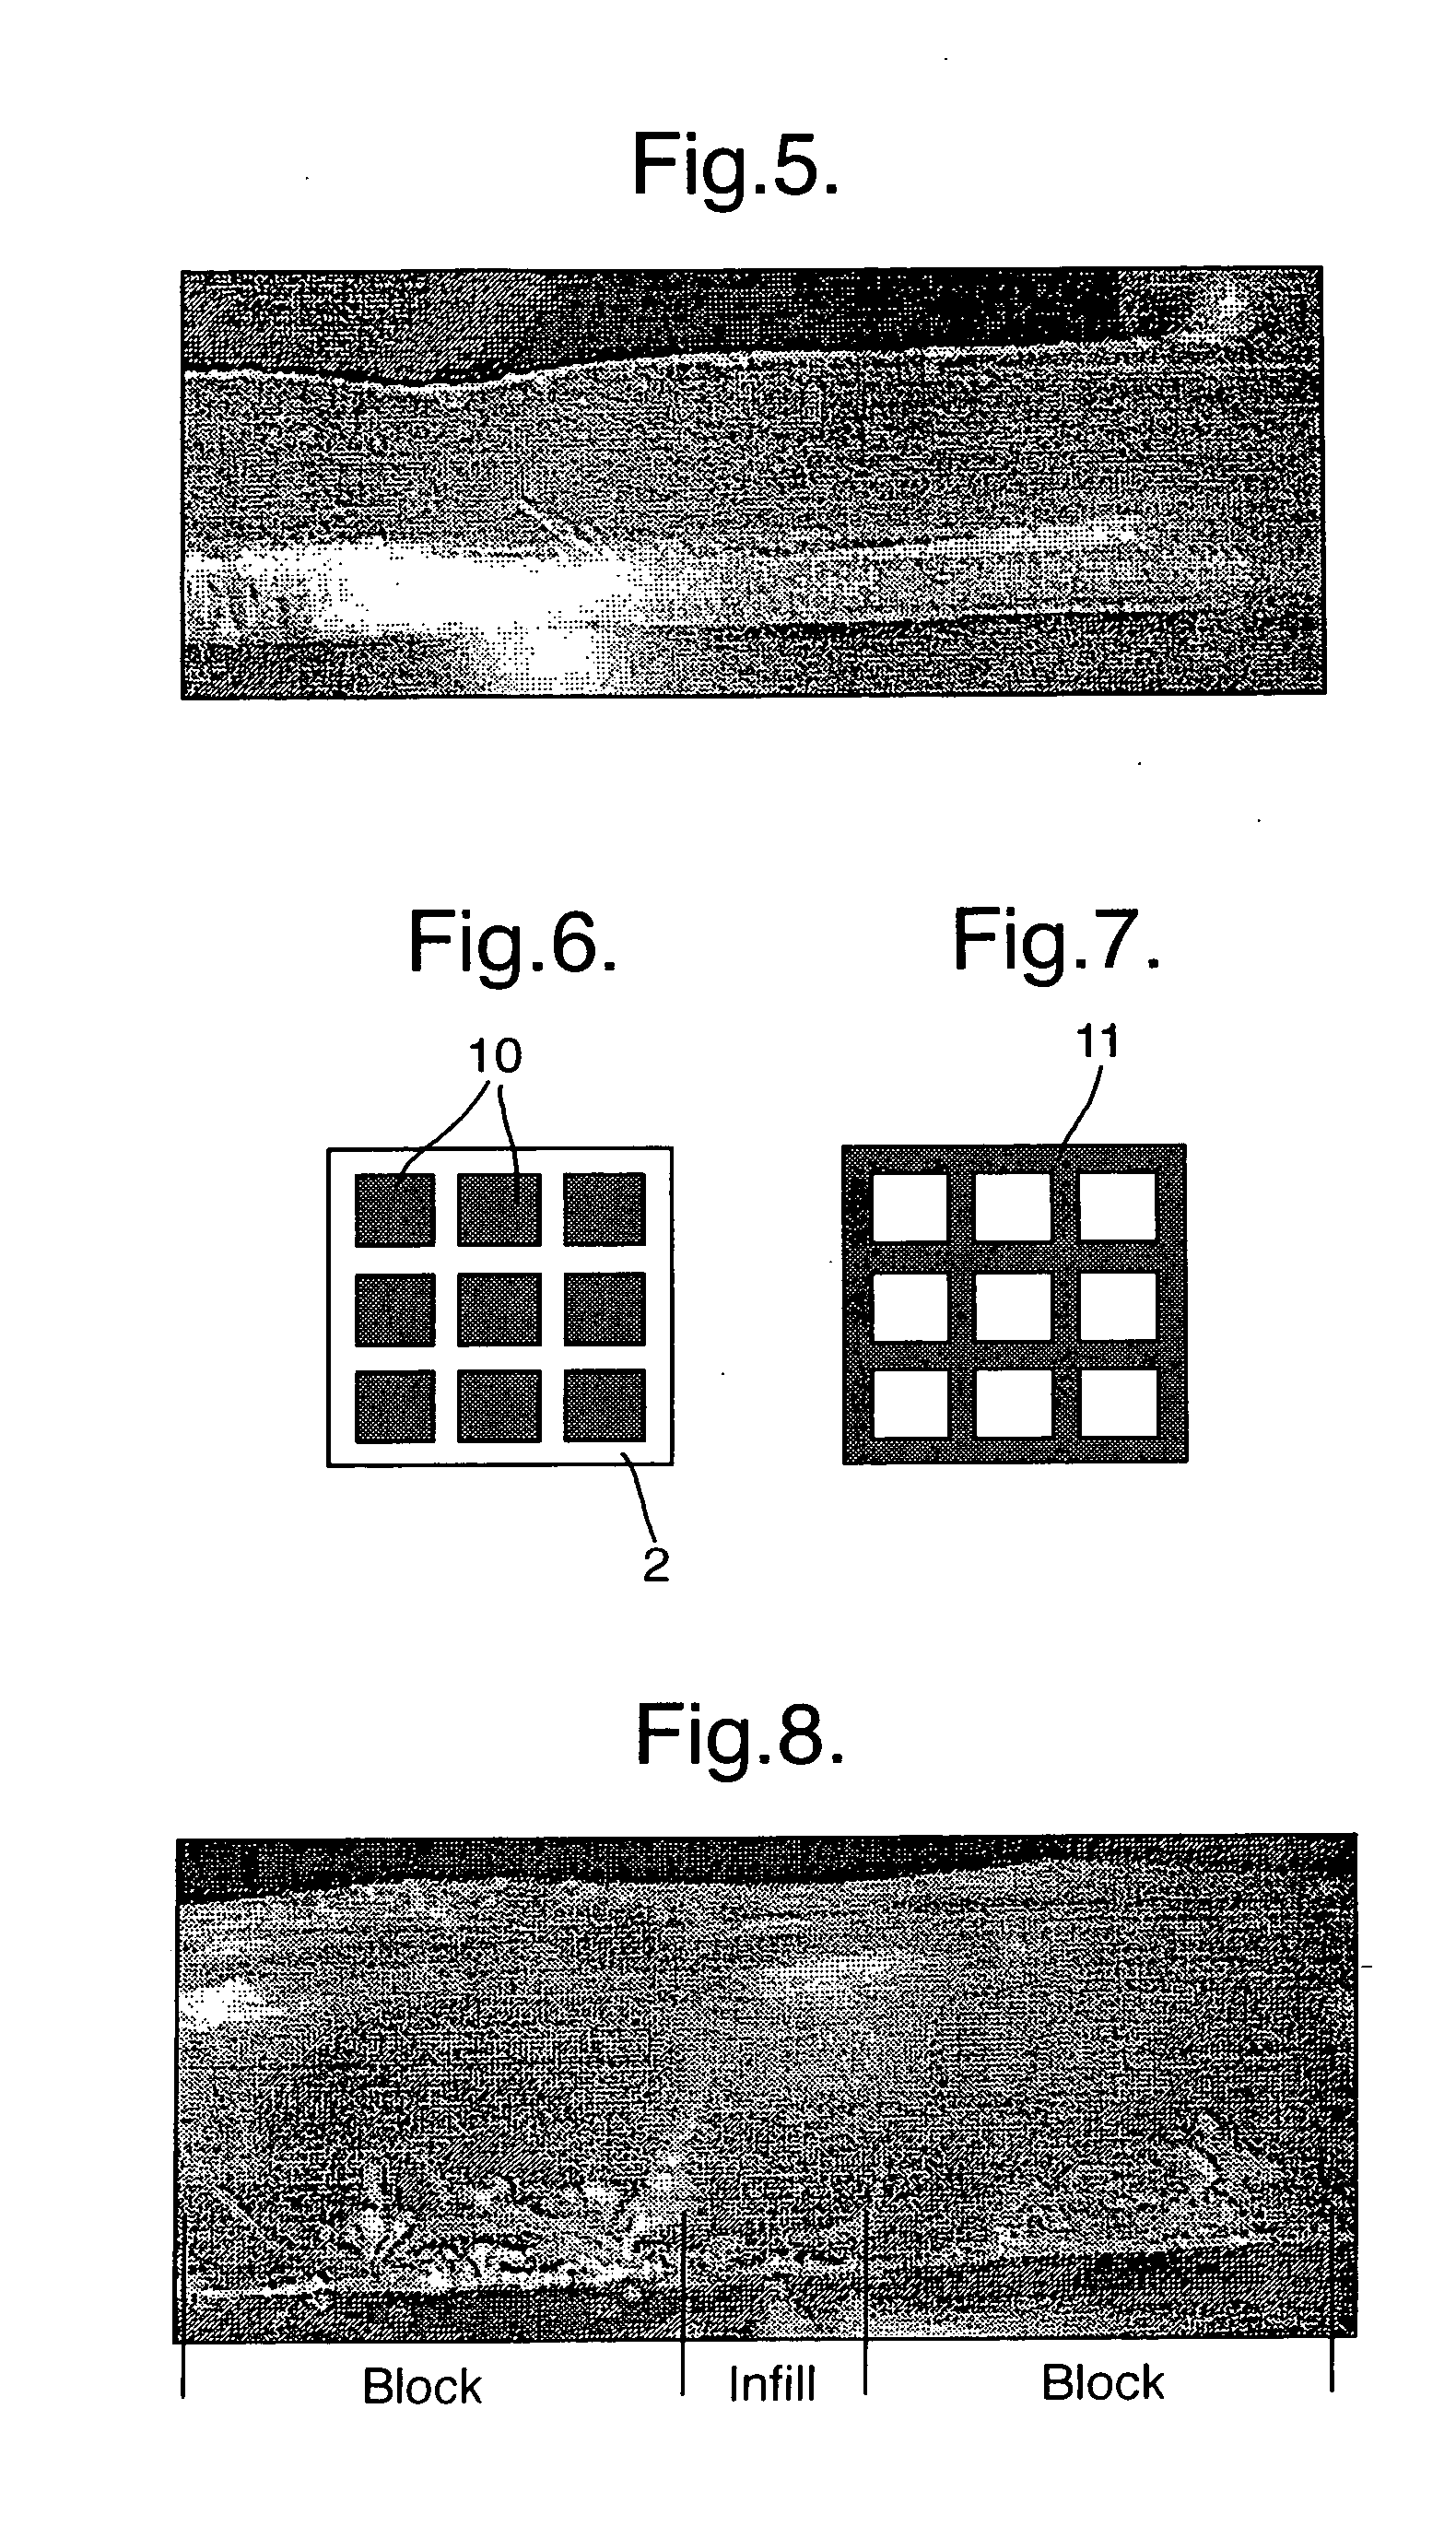 Providing a surface layer or structure on a substrate